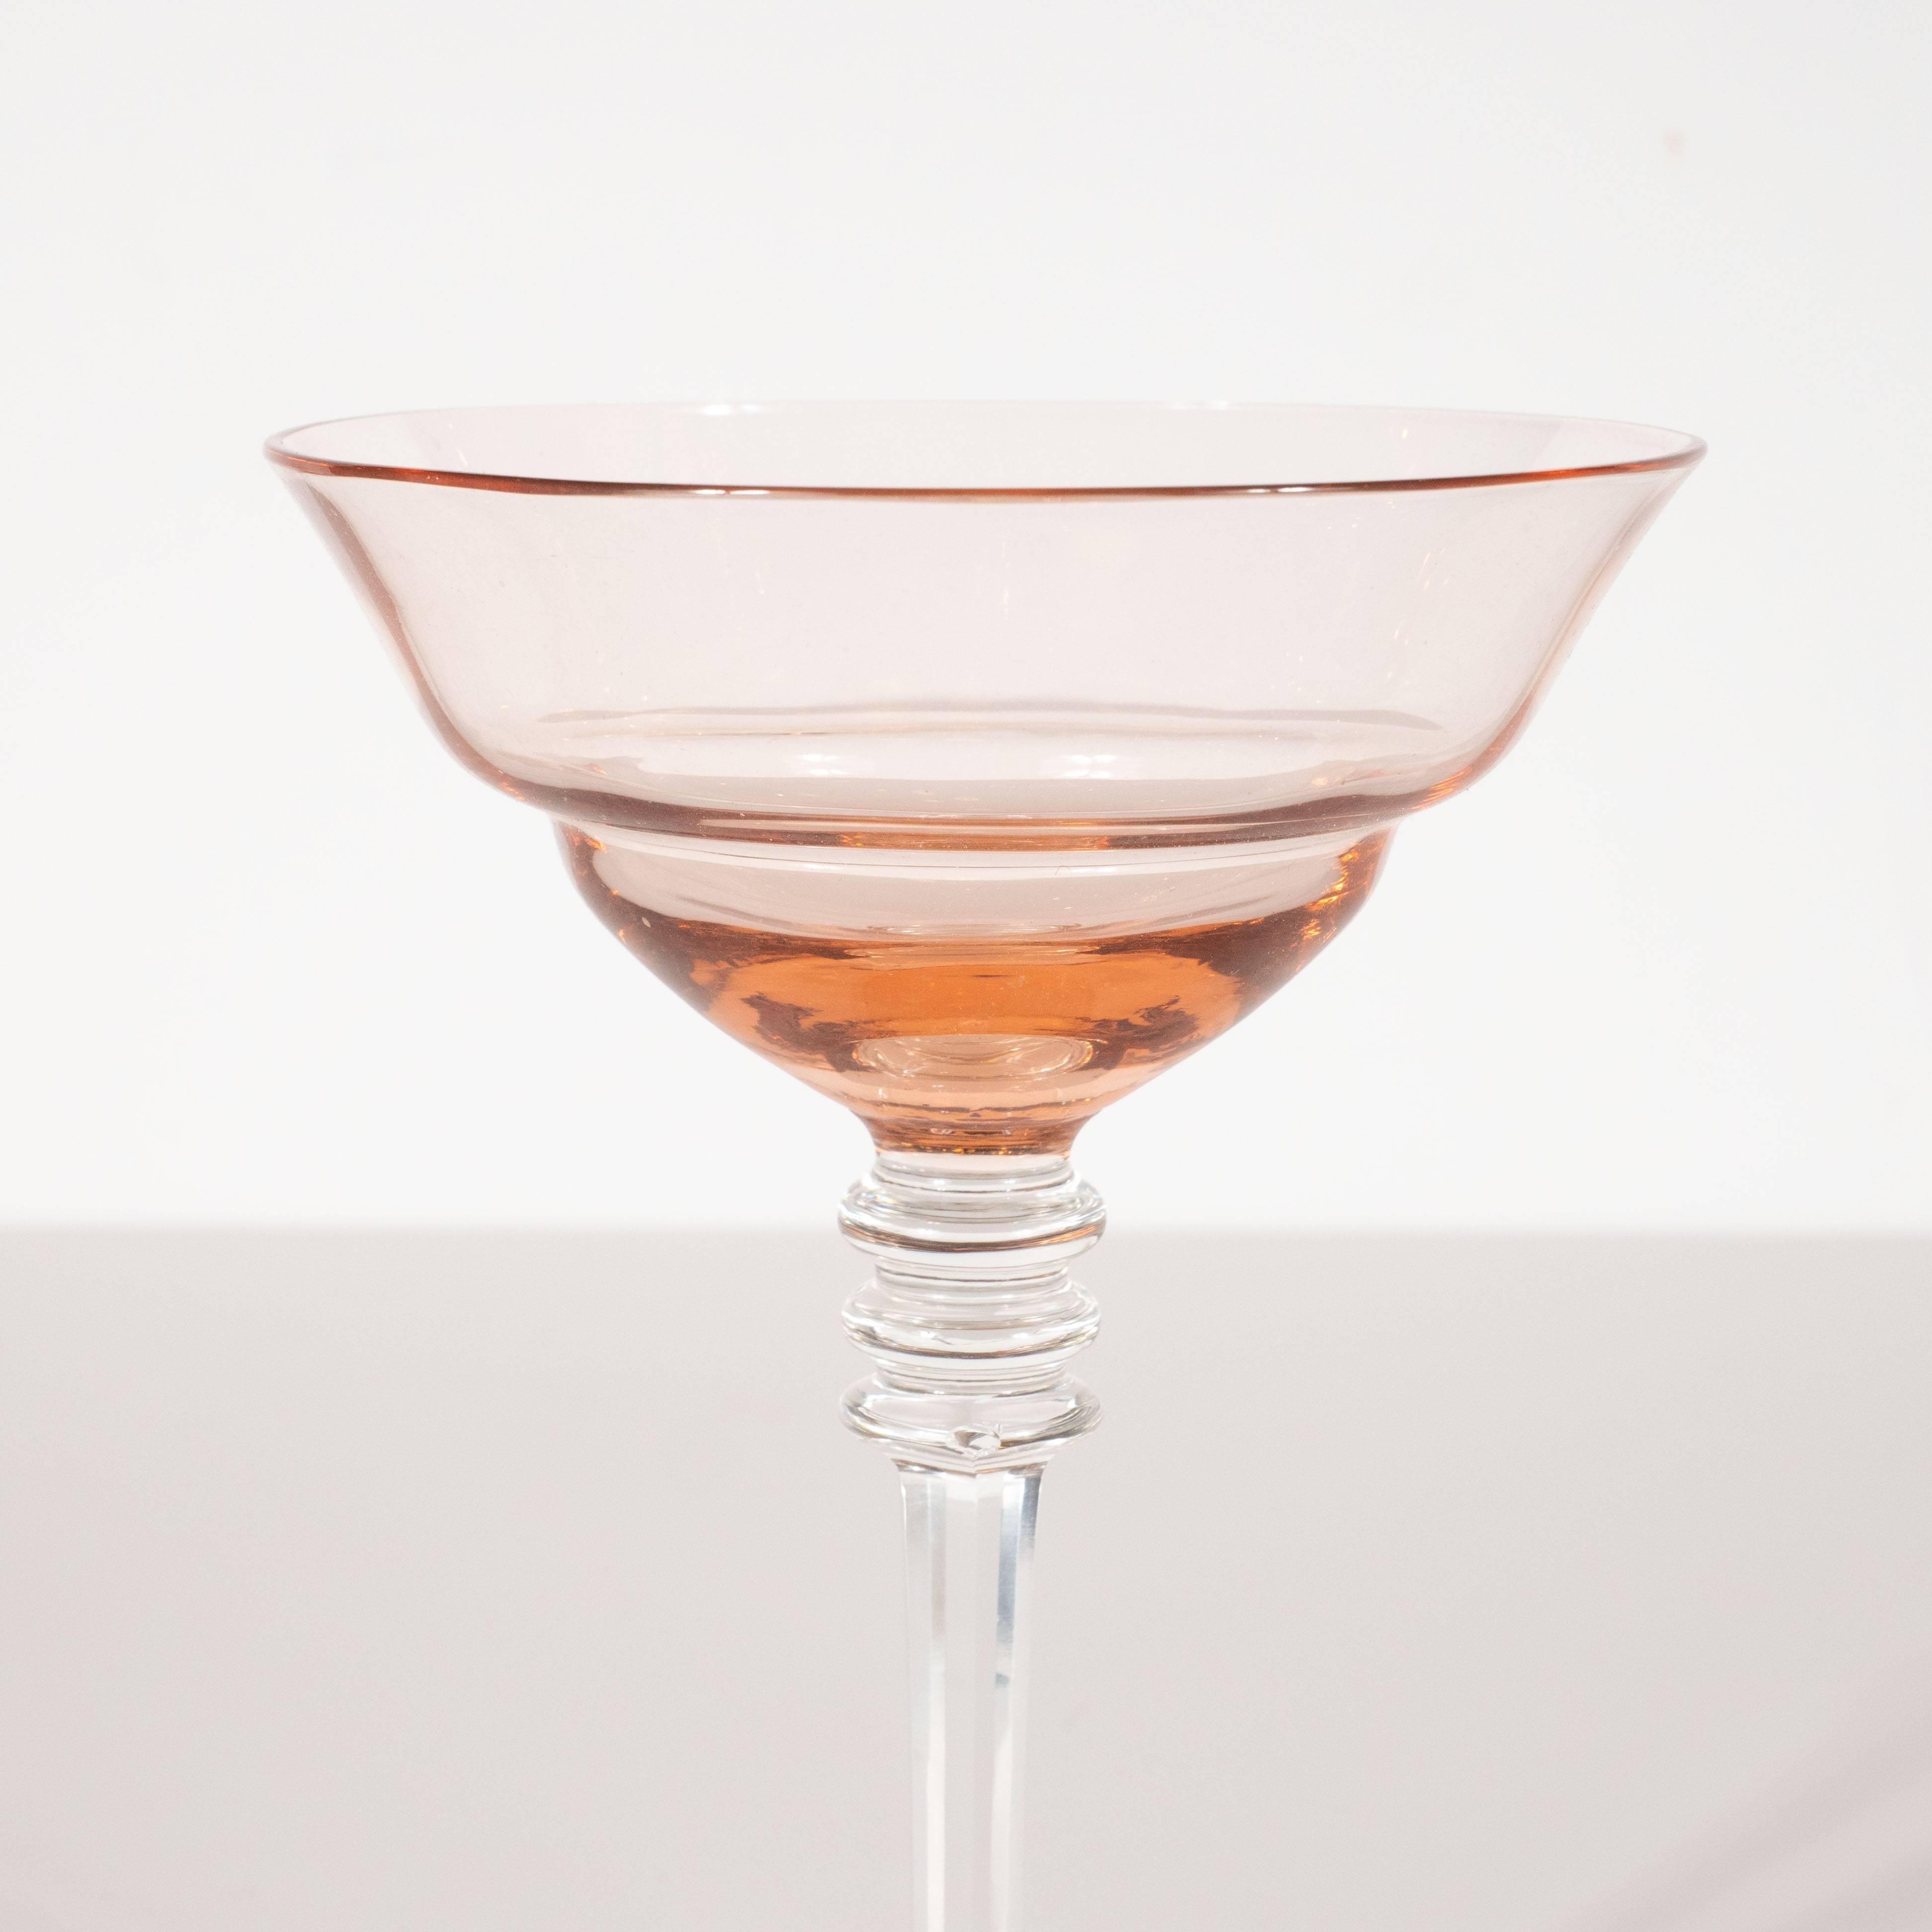 Mid-20th Century Set of Four American Art Deco Blush Rose and Translucent Glass Drinks Glasses